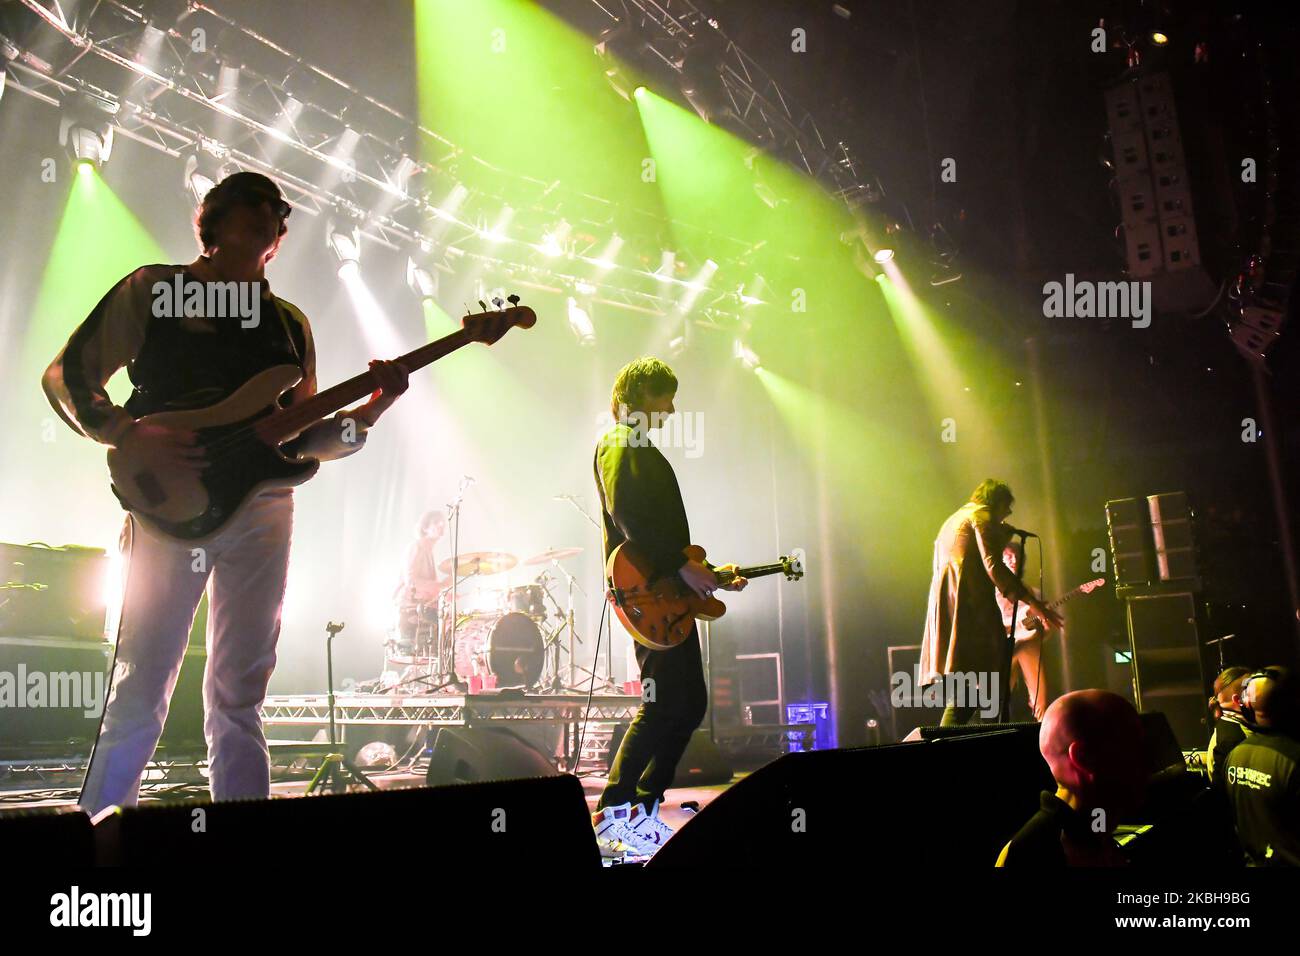 American indie rock band The Strokes perform live at Roundhouse, London on February 19, 2020. The Strokes are an American rock band from New York City, composed of singer Julian Casablancas, lead guitarist Nick Valensi, rhythm guitarist Albert Hammond Jr., bassist Nikolai Fraiture, and drummer Fabrizio Moretti. (Photo by Alberto Pezzali/NurPhoto) Stock Photo